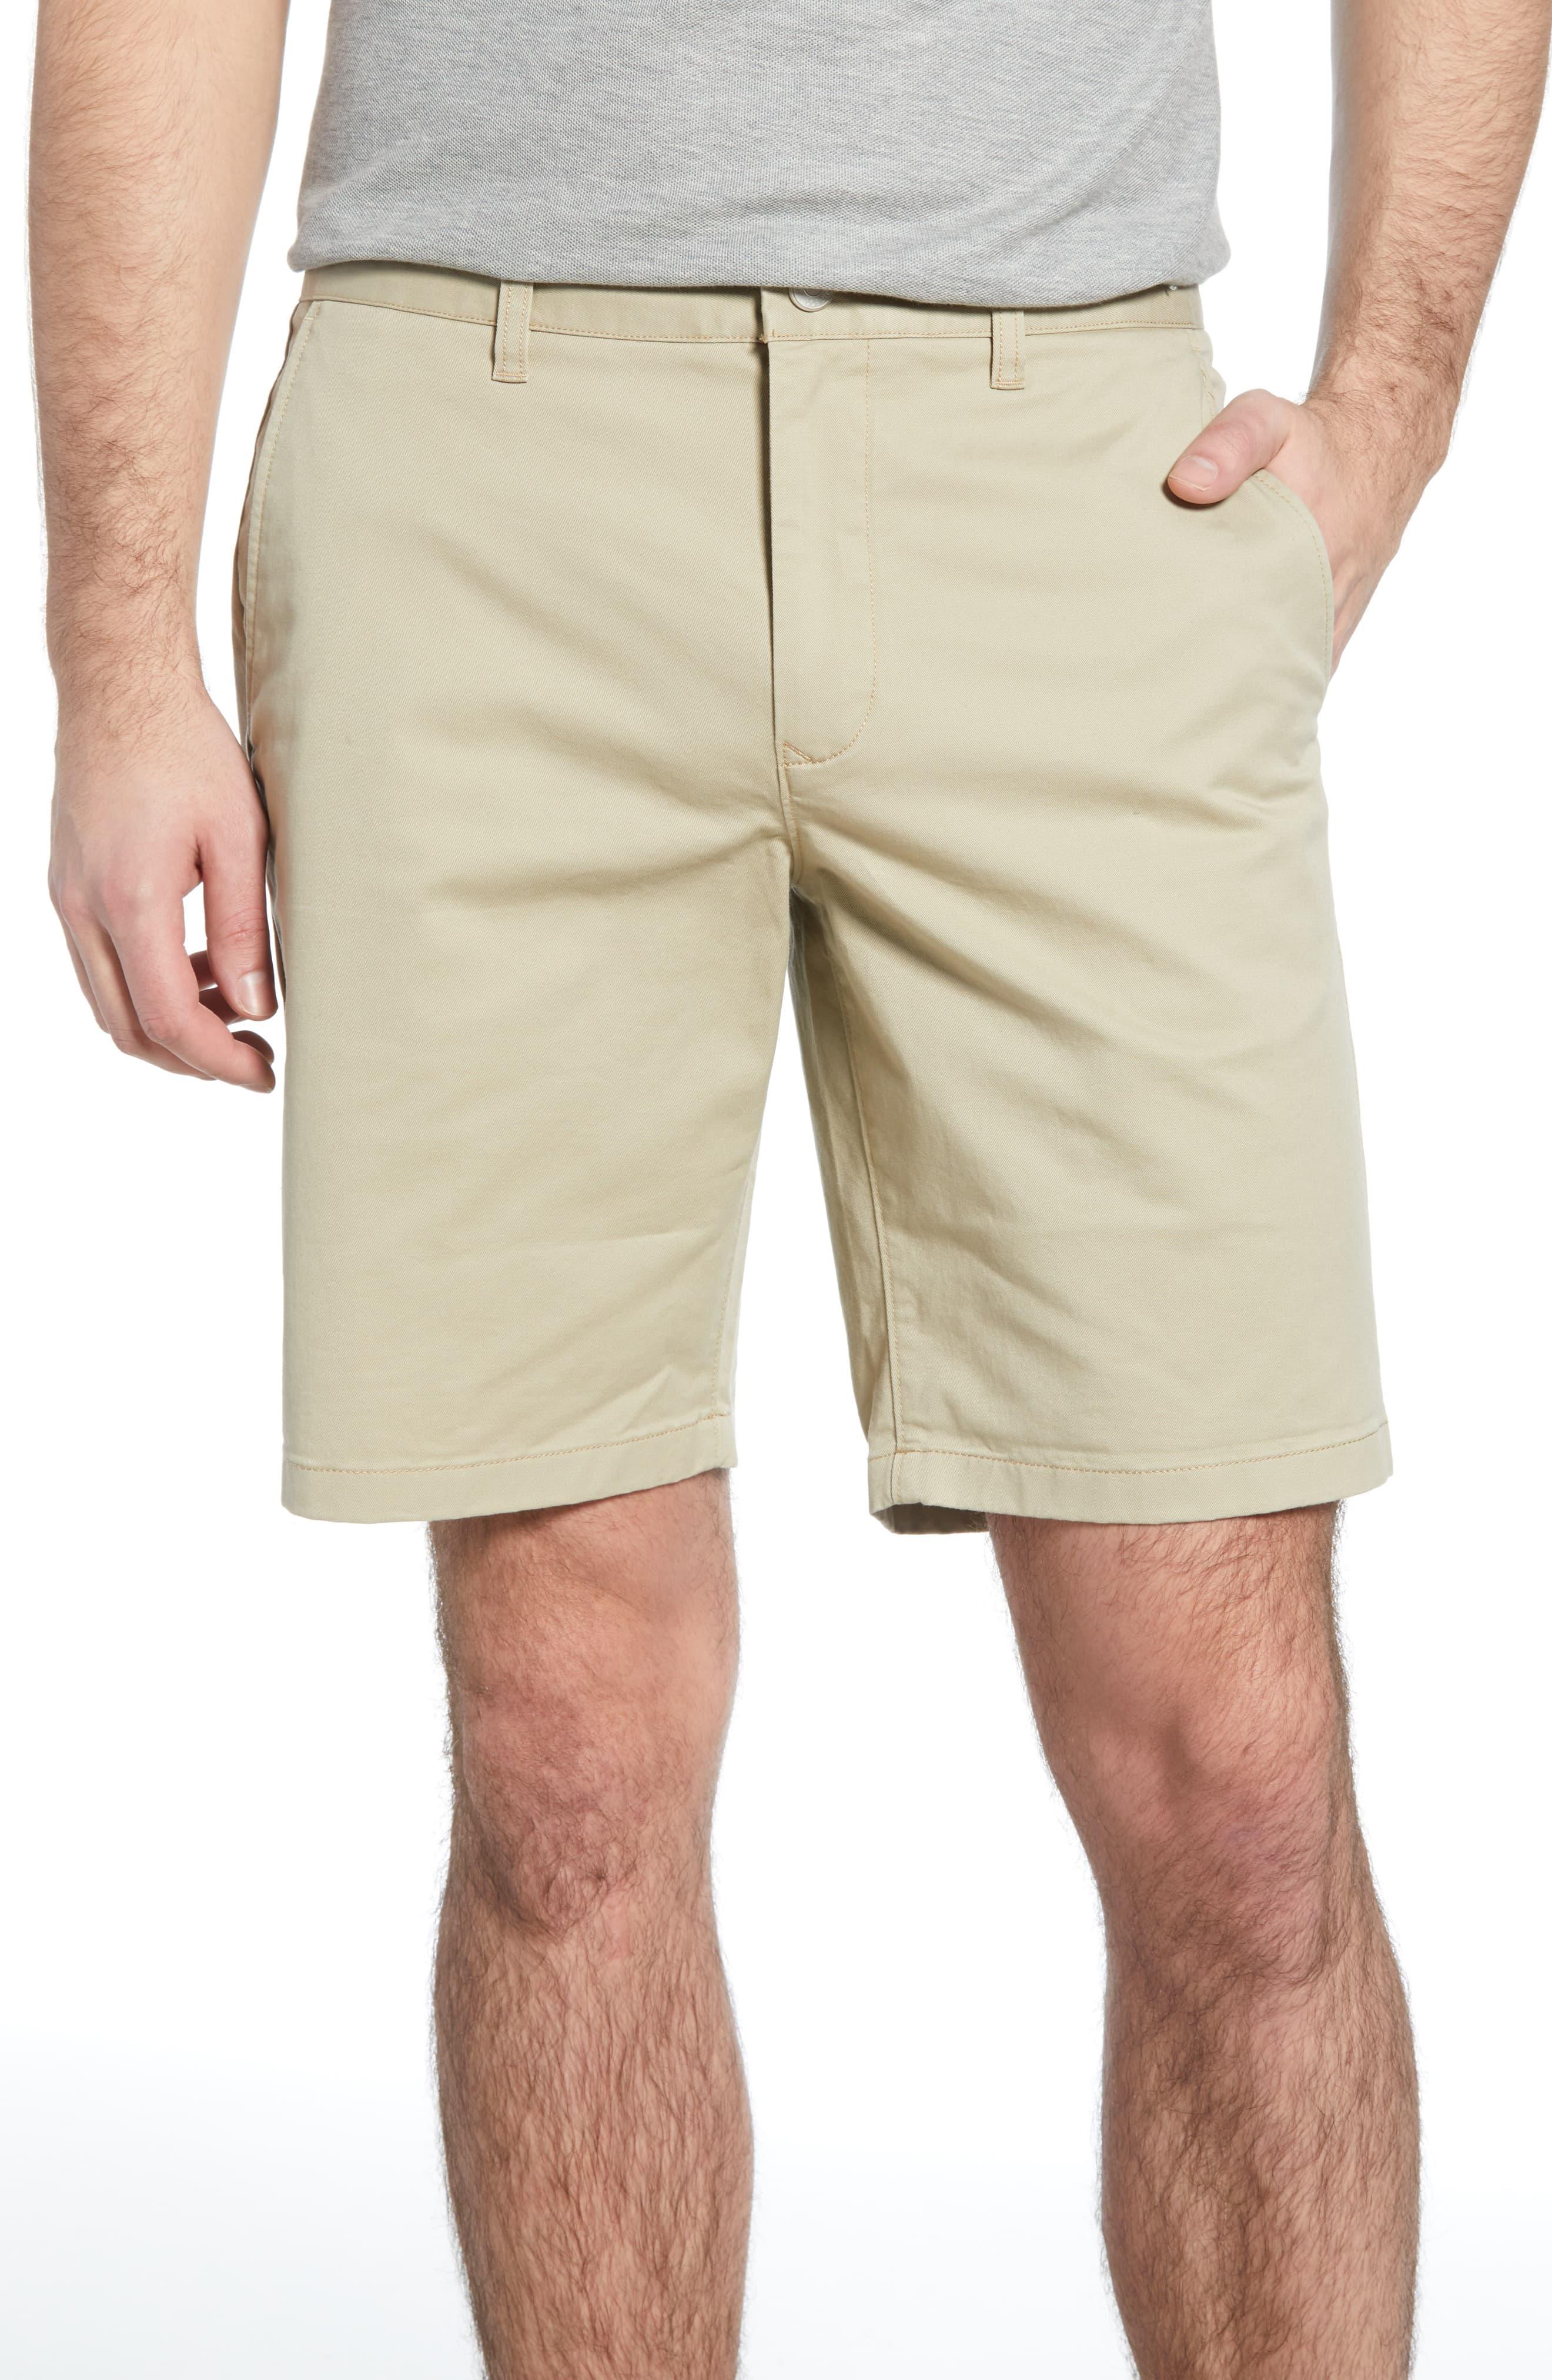 Bonobos Stretch Washed Chino 9-inch Shorts in Natural for Men - Lyst